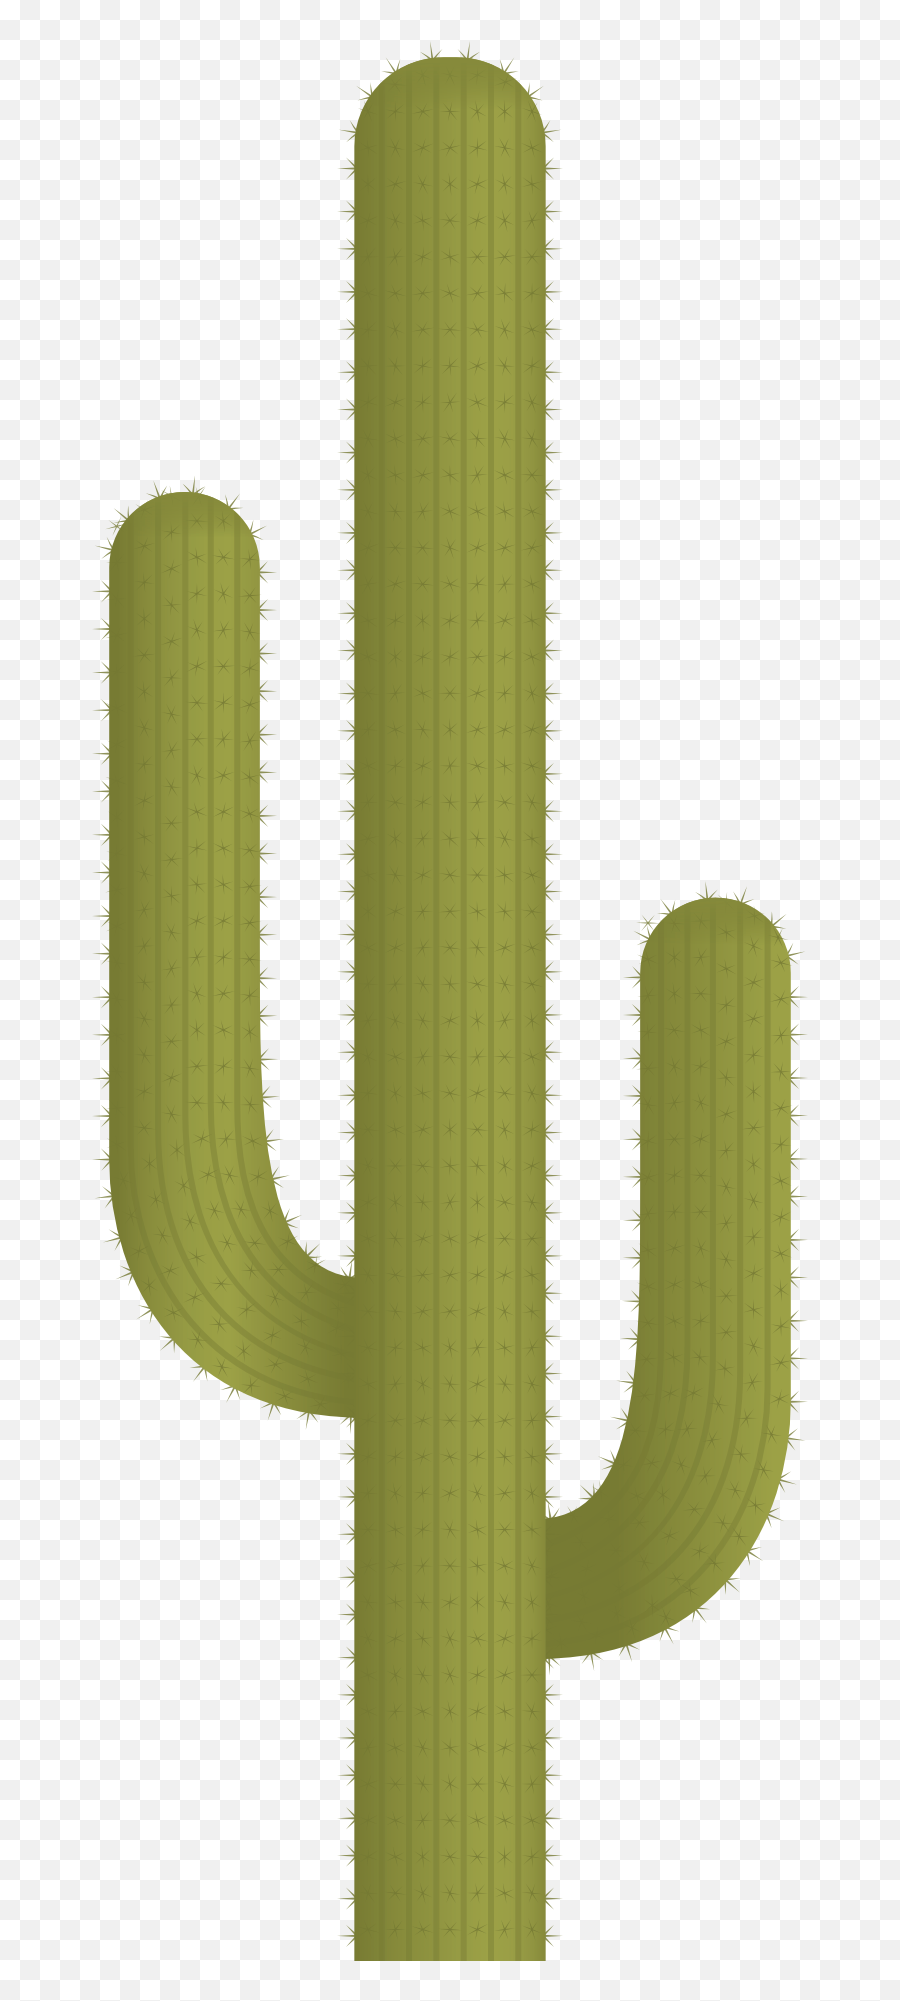 Cactus Clipart Png 3 Station - Cactus Plant Vector Png,Cactus Clipart Png